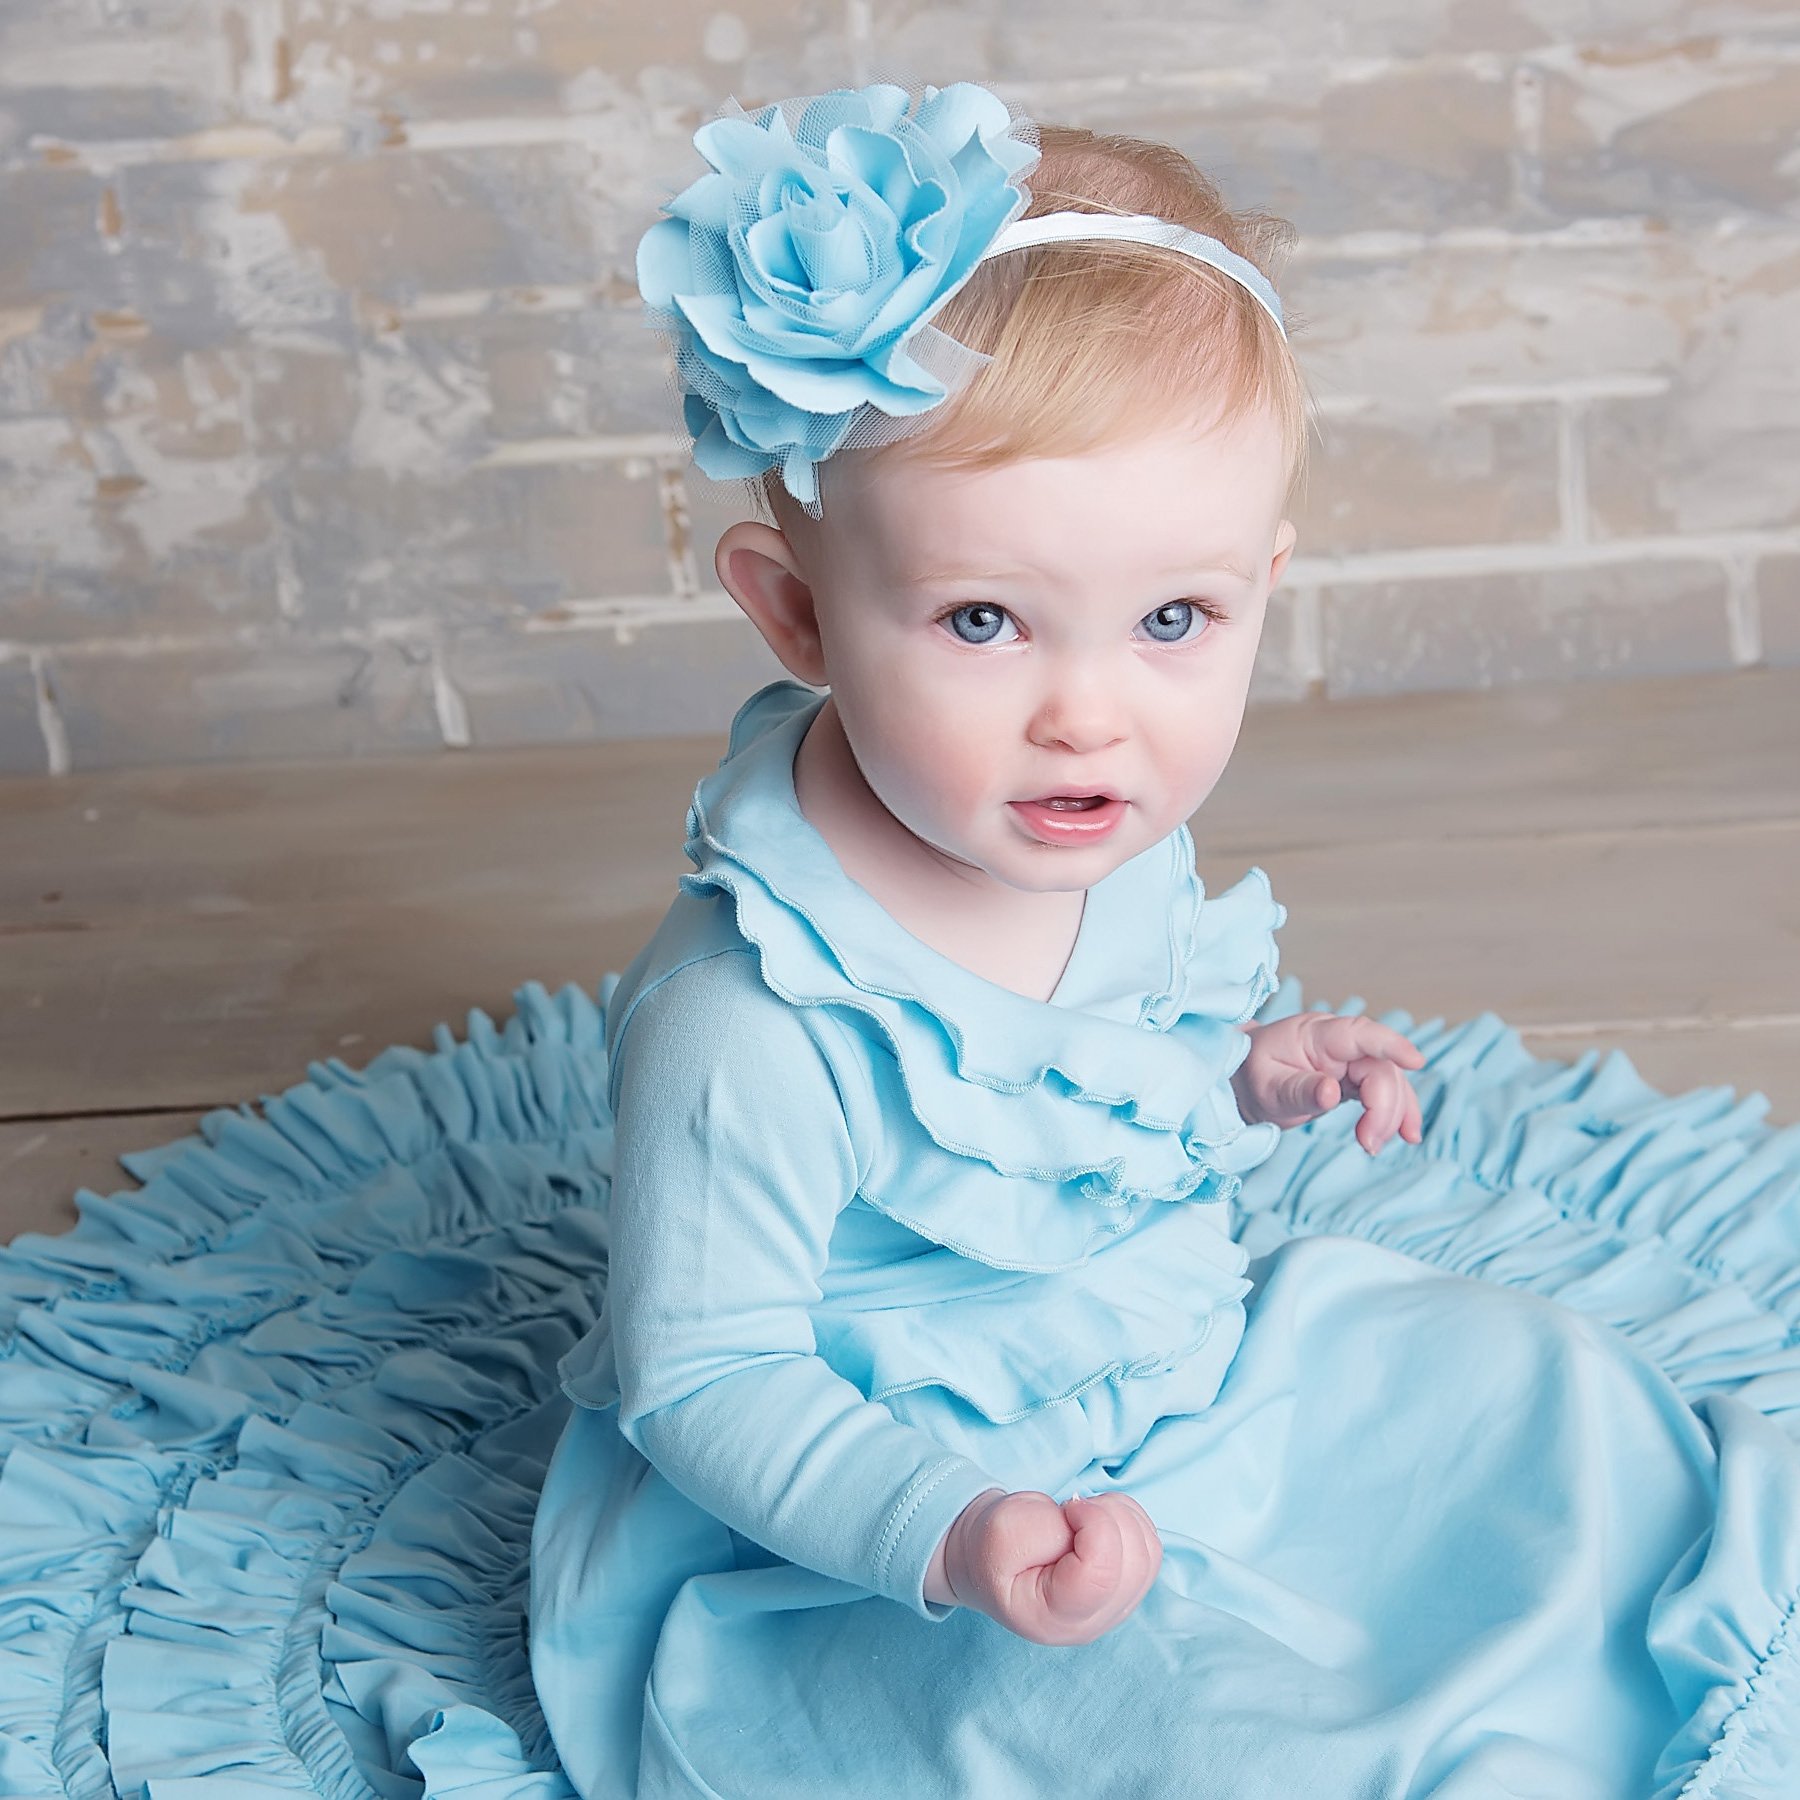 SwaddleDesigns Pajama Gowns